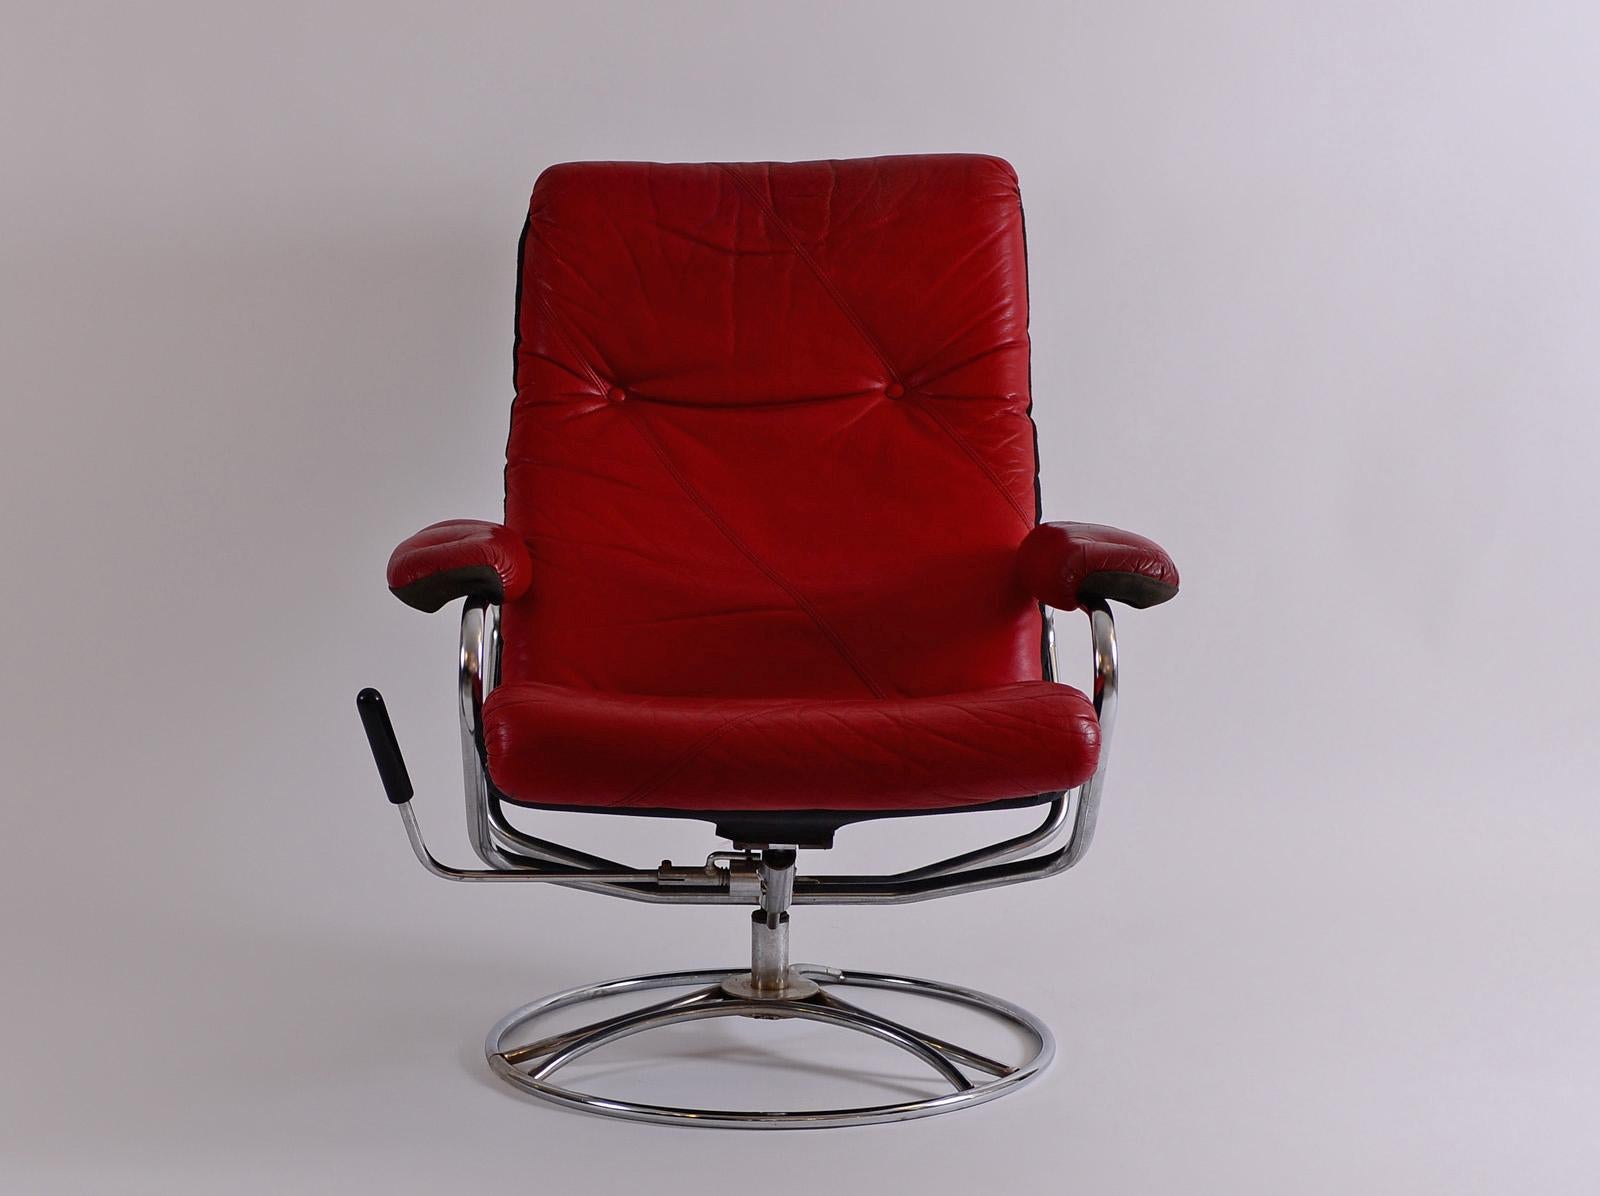 Swivelling and turnable lounge chair, extremely comfortable. Presumable a predecessor of the Ekornes Stressless which was built from 1971 in Norway. Chair rotates 360 degrees. Chair reclines from an upright sitting position to nearly horizontal, and